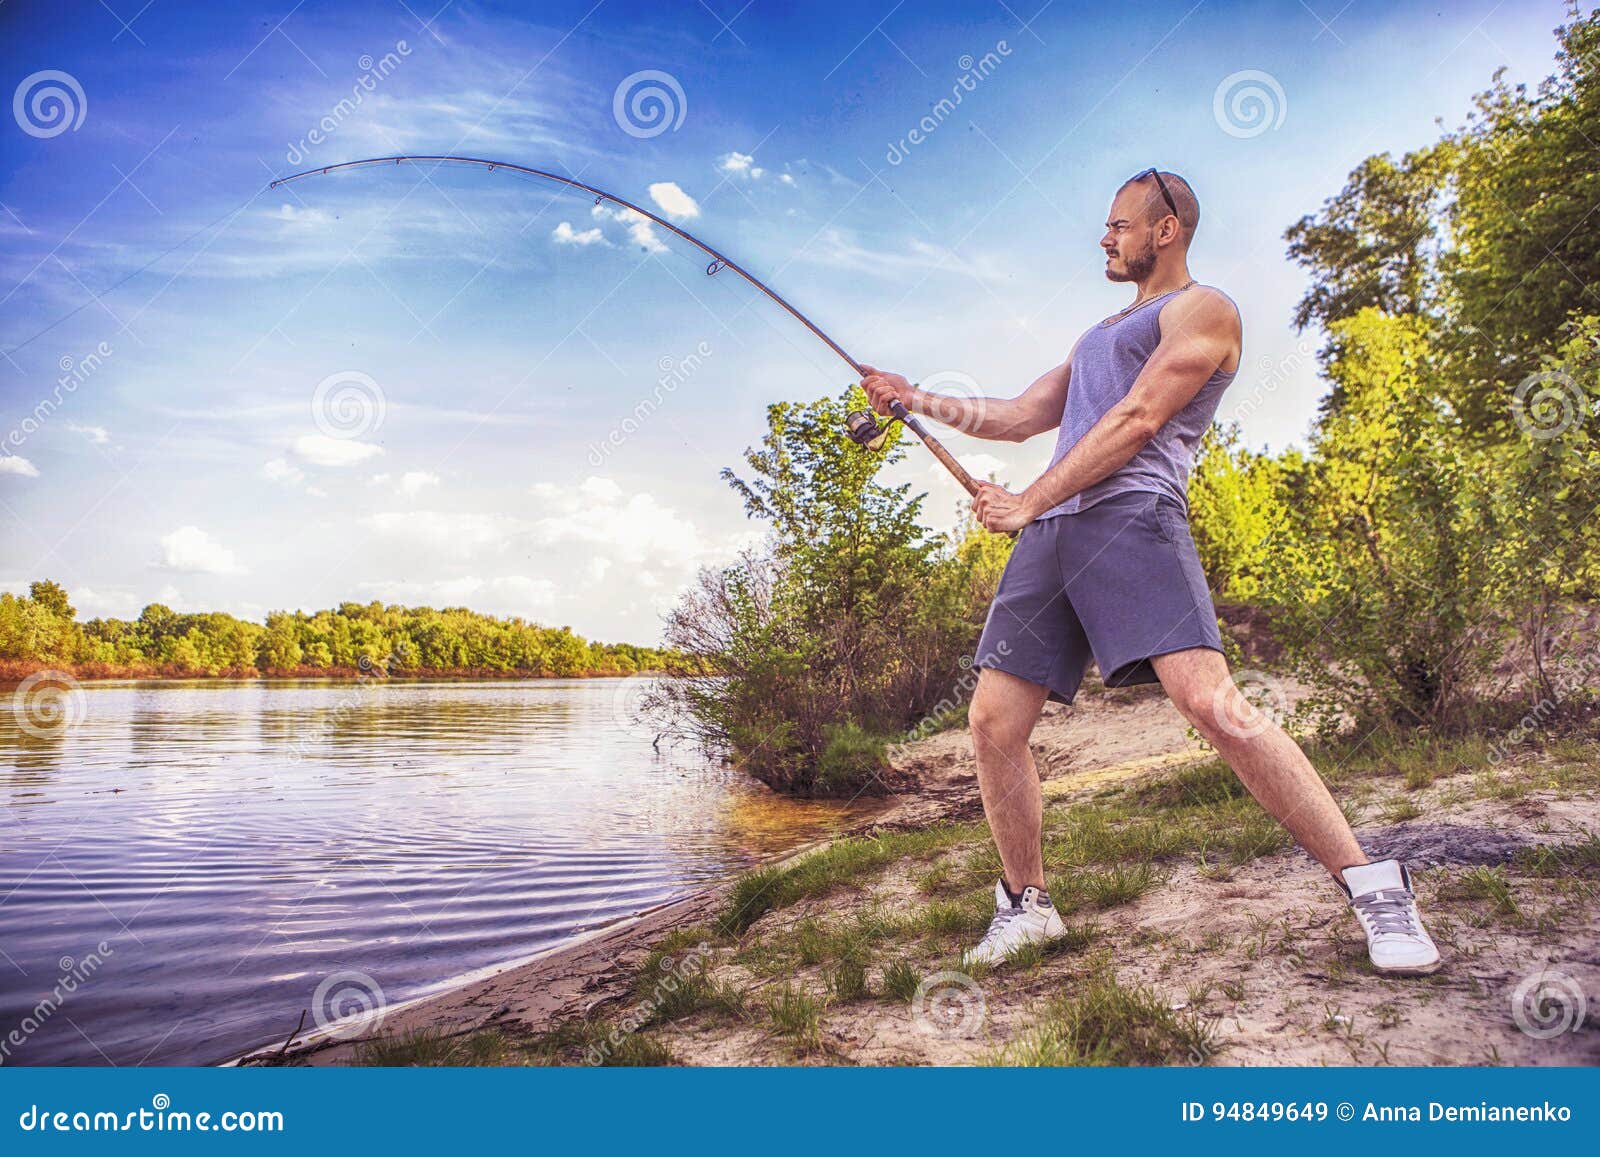 Young Handsome Brutal Caucasian Man in Casual Outfit Fishing on